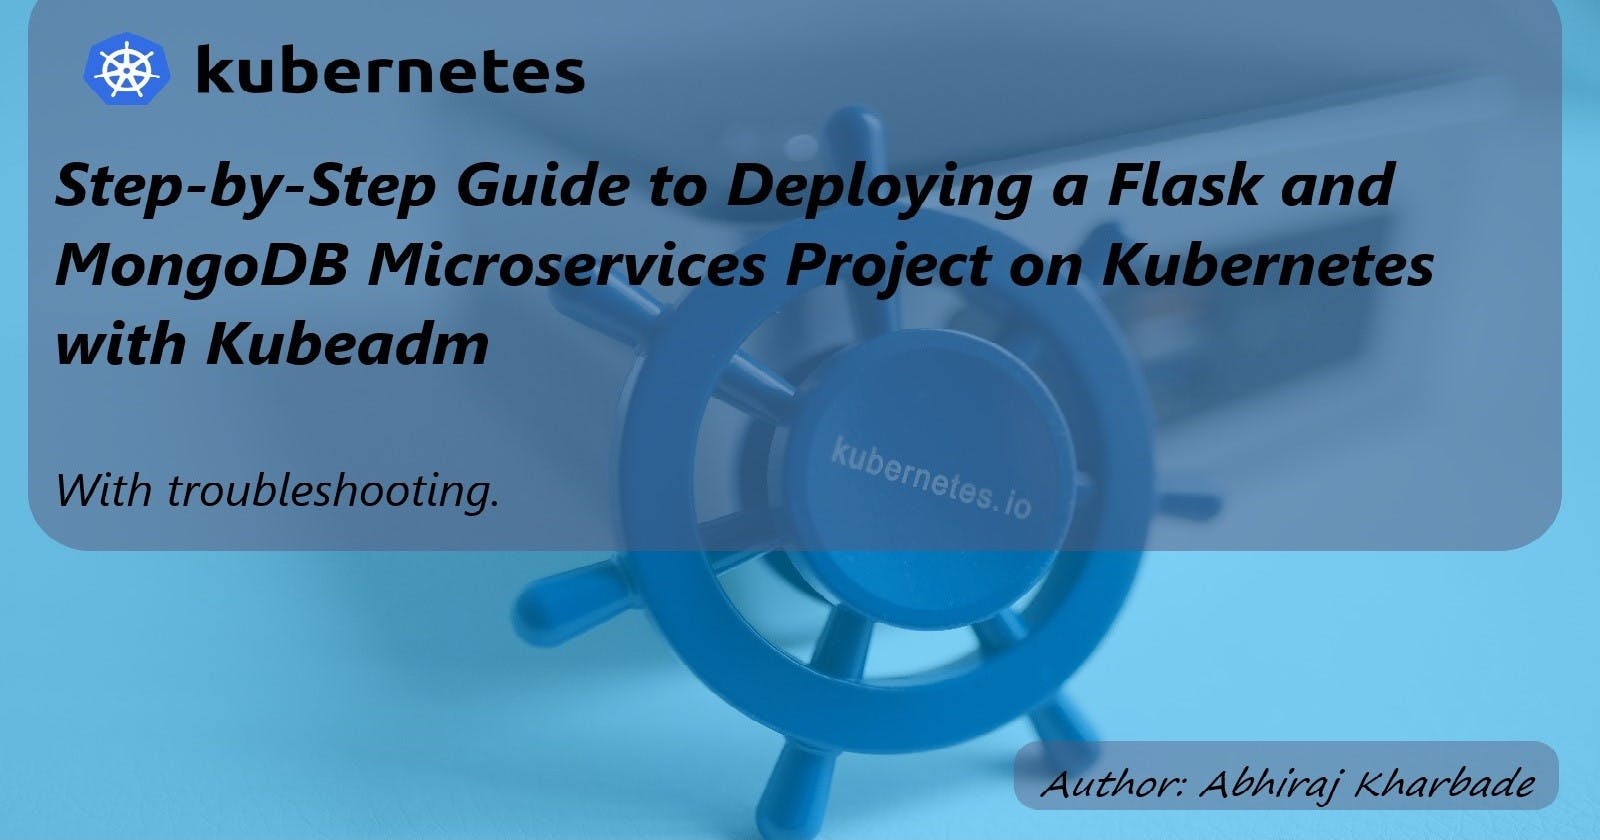 Step-by-Step Guide to Deploying a Flask and MongoDB Microservices Project on Kubernetes with Kubeadm